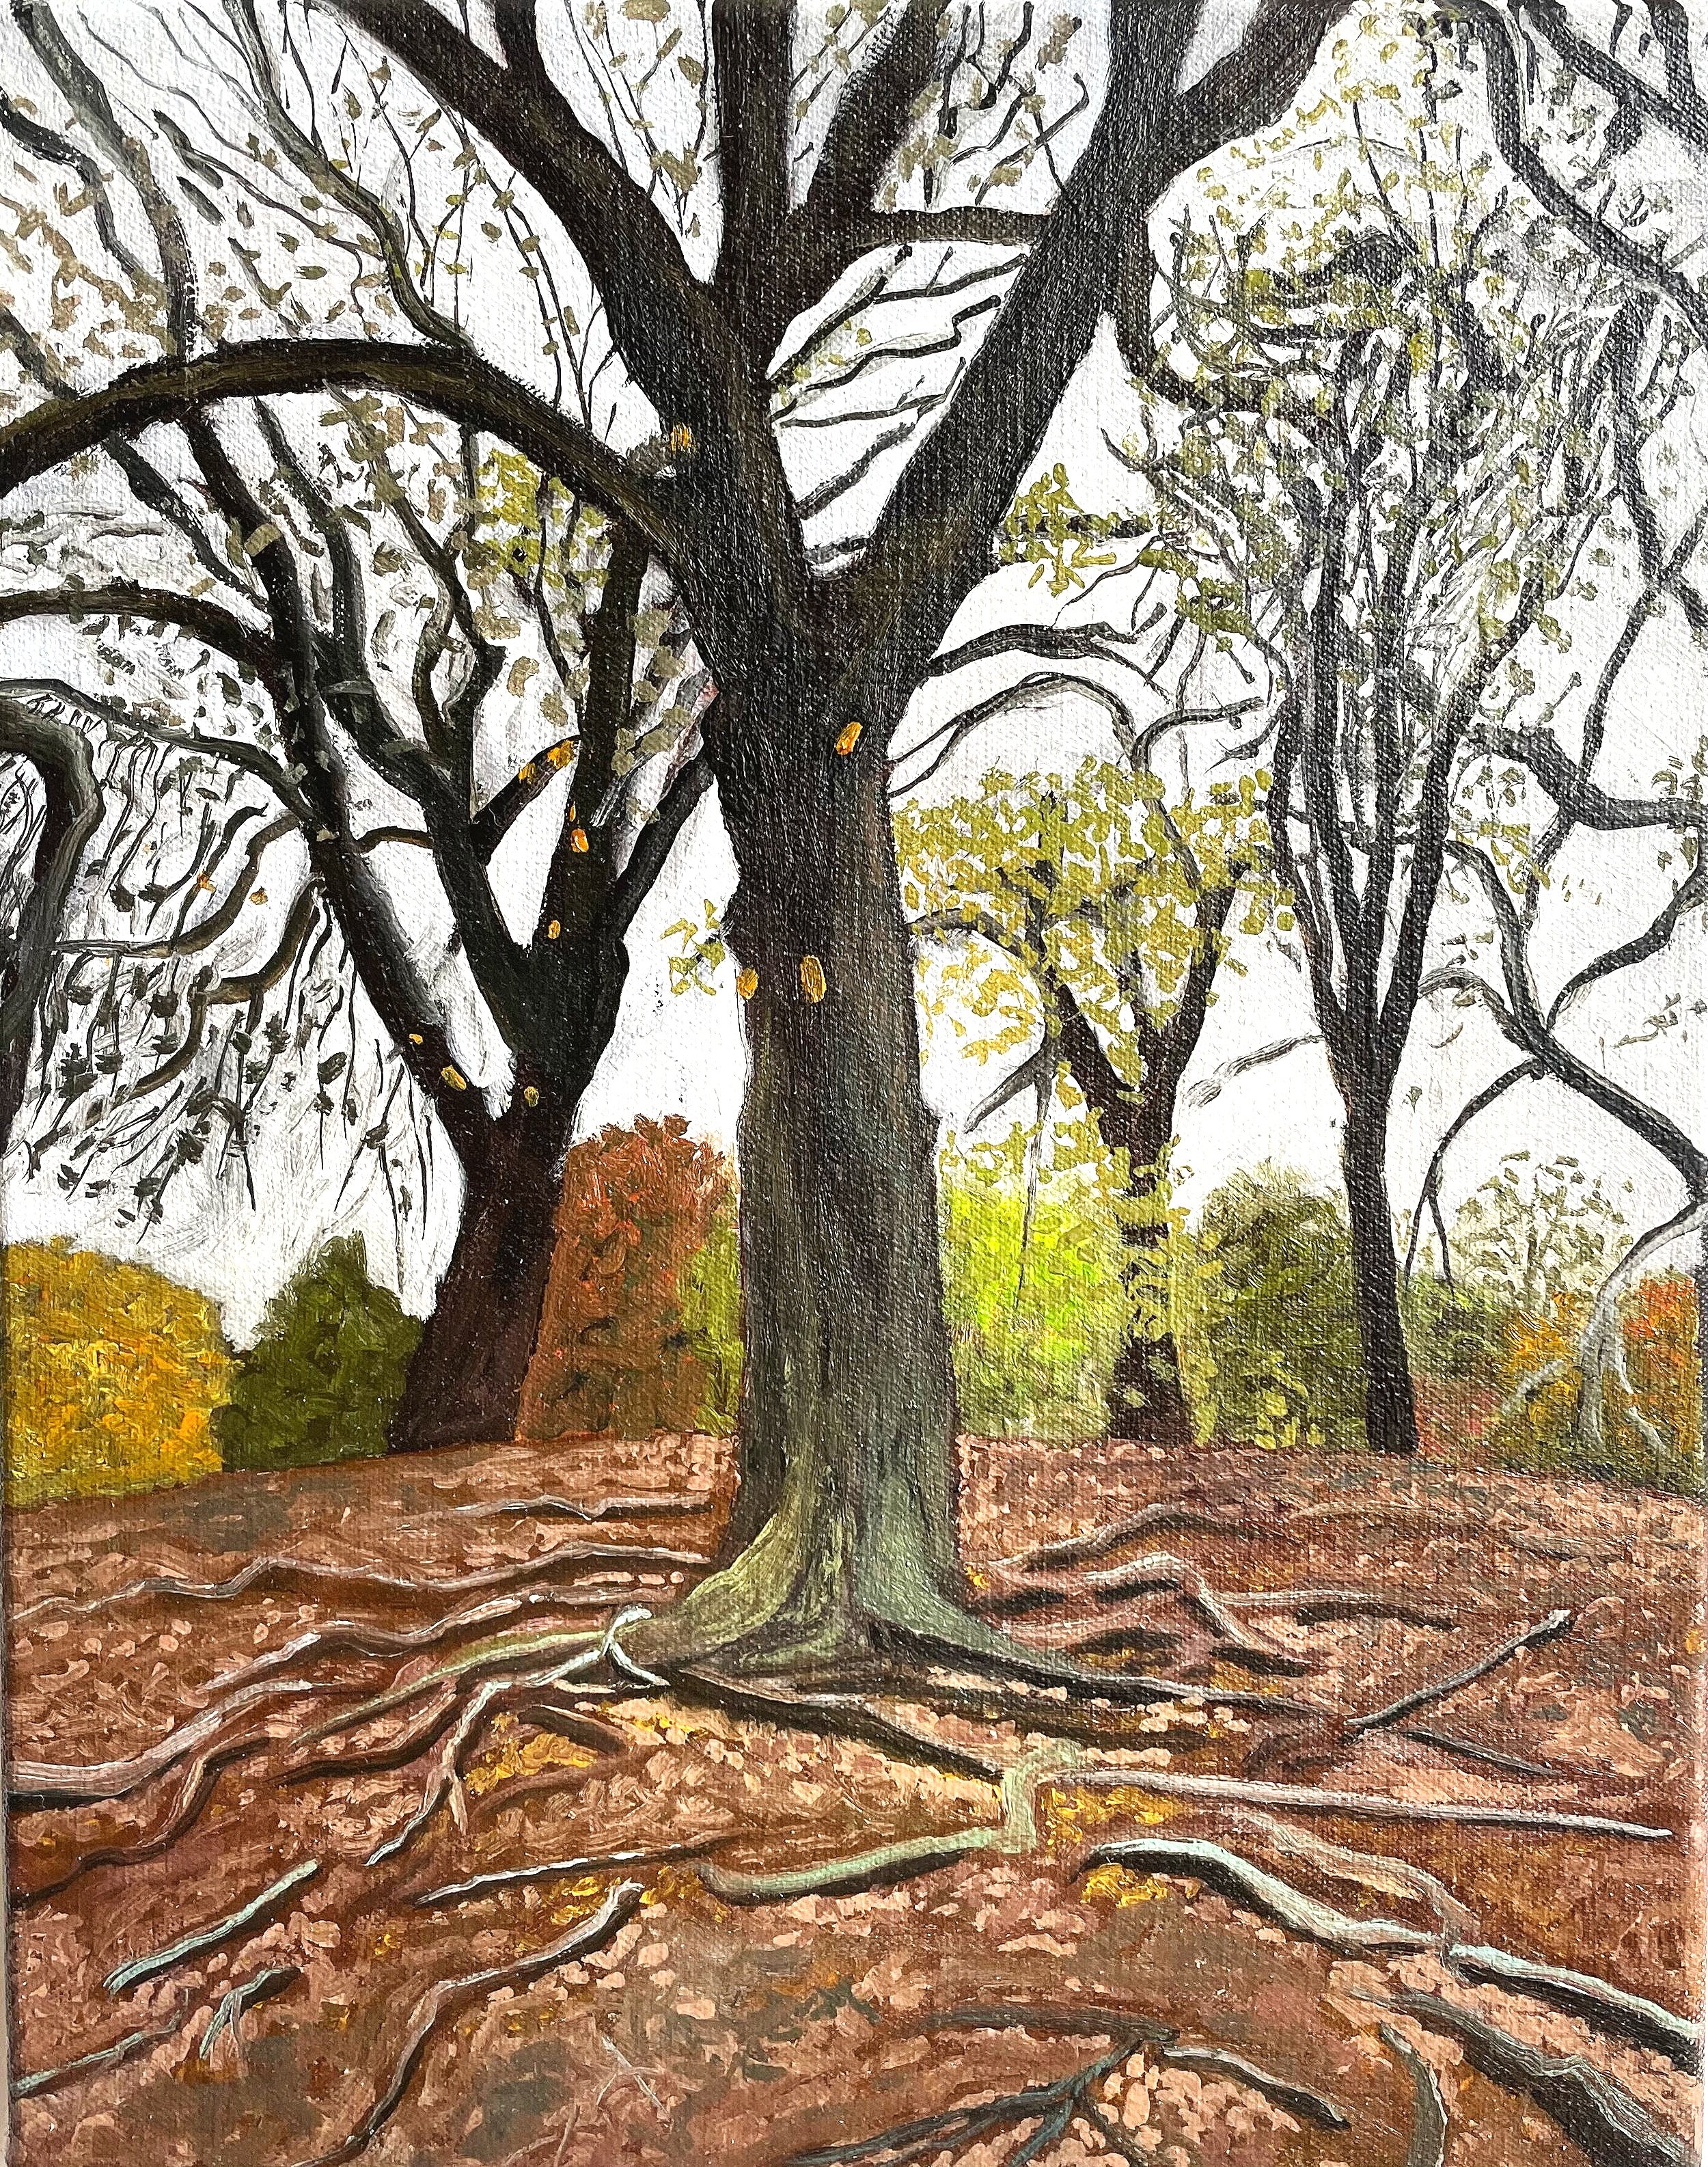   Tree with Roots in Autumn,  Oil on Canvas, 14” x 11”, 2022 